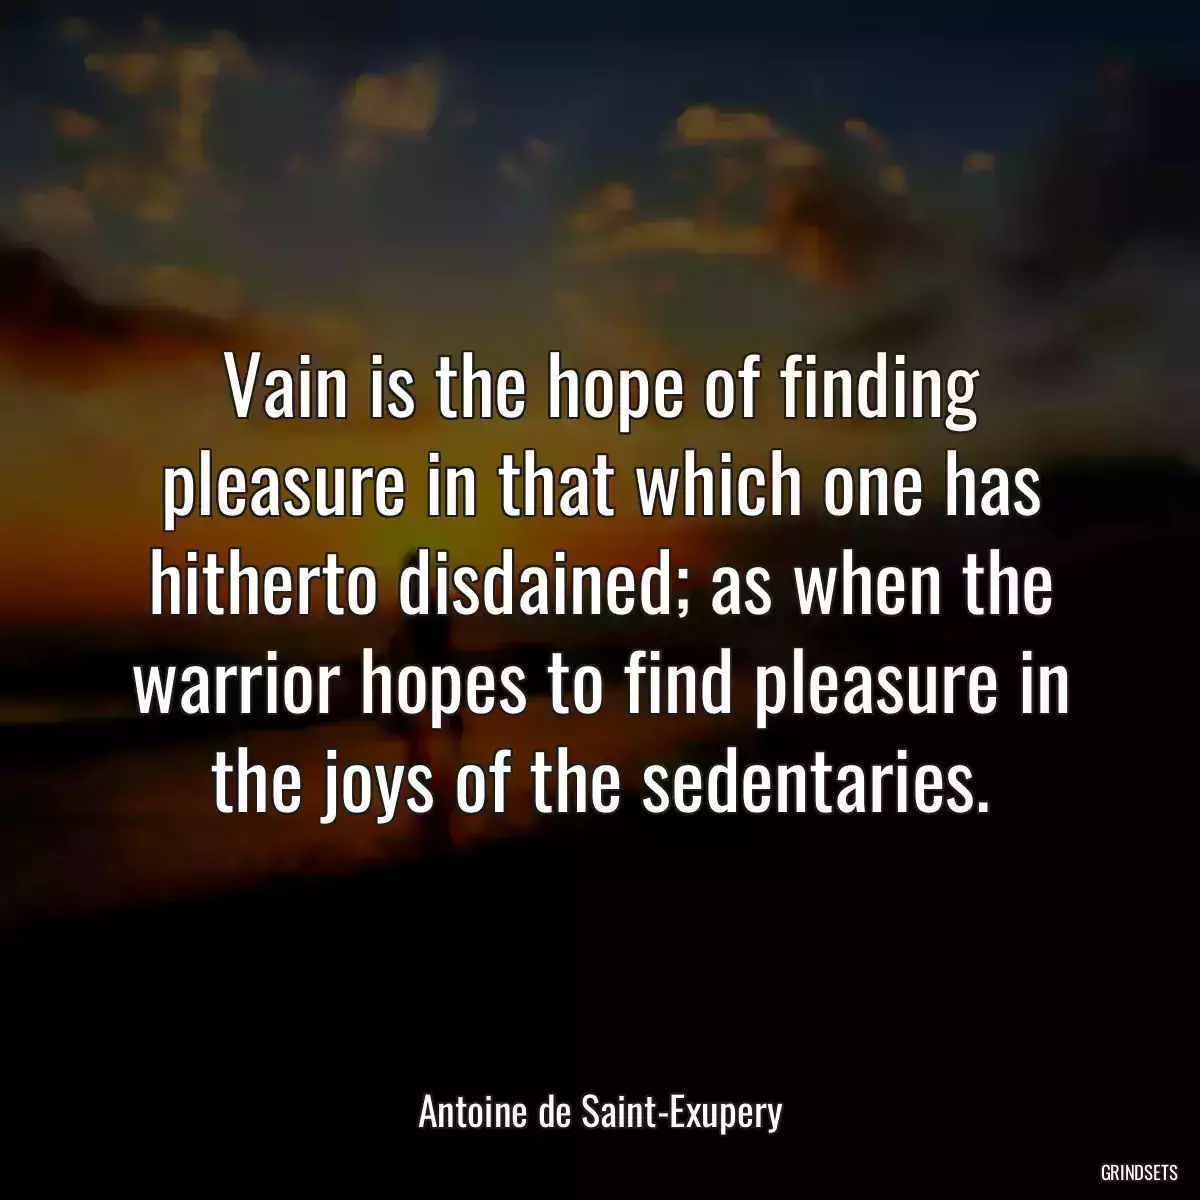 Vain is the hope of finding pleasure in that which one has hitherto disdained; as when the warrior hopes to find pleasure in the joys of the sedentaries.